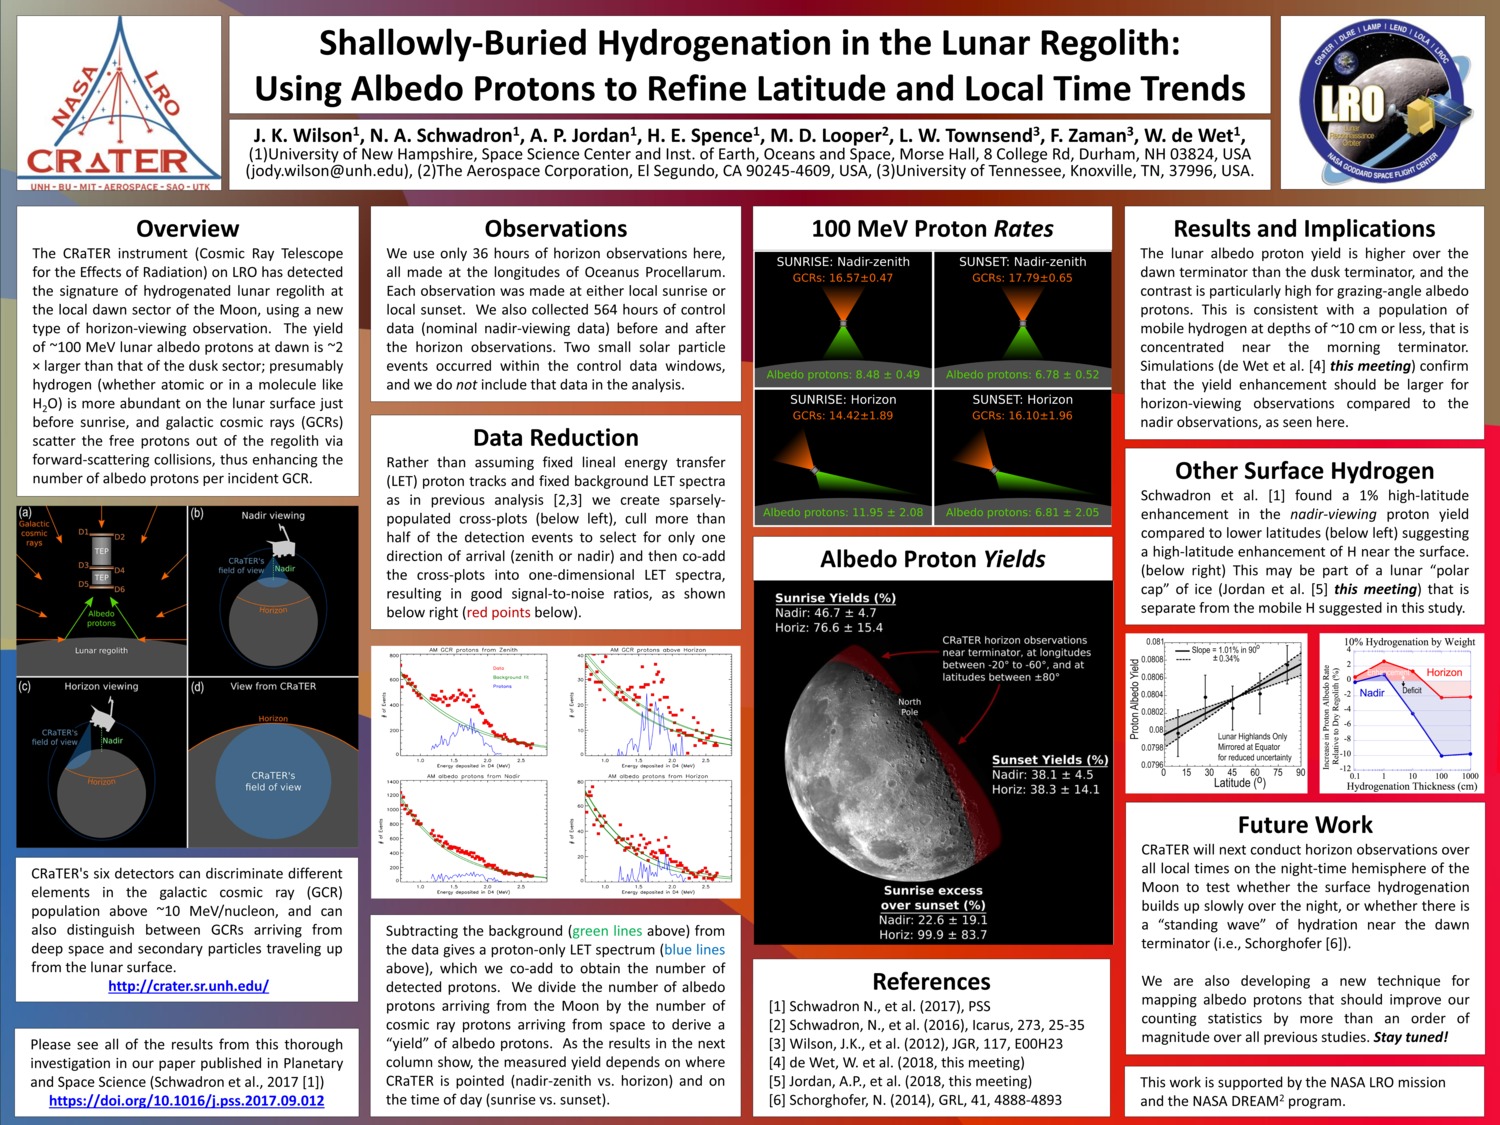 Shallowly-Buried Hydrogenation In The Lunar Regolith: Using Albedo Protons To Refine Latitude And Local Time Trends by jkwilson